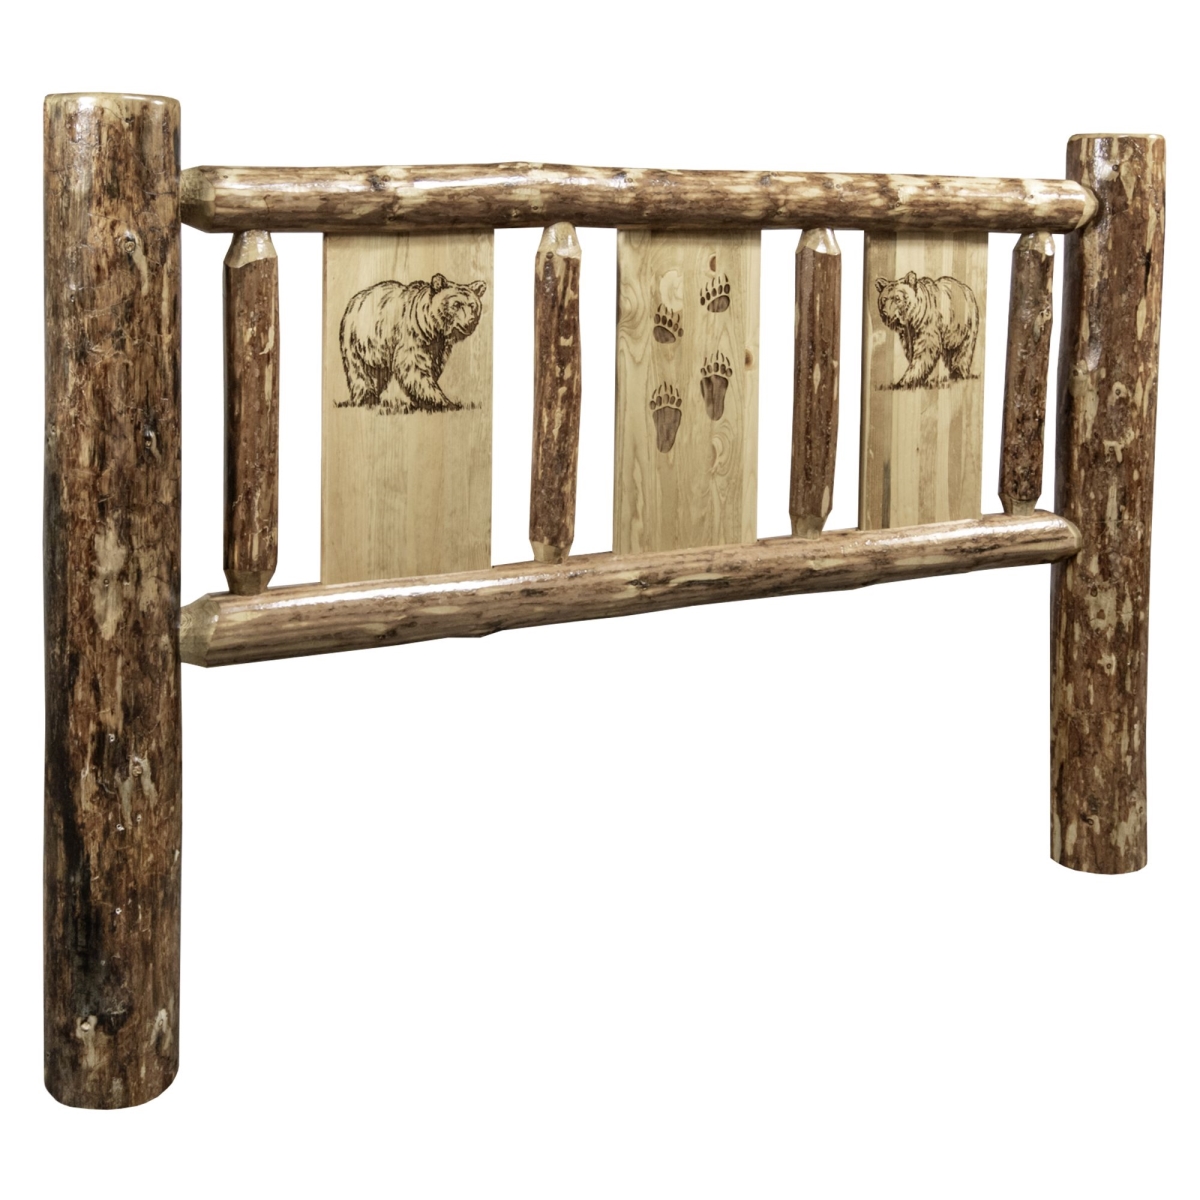 Picture of Montana Woodworks MWGCTHBLZBEAR Glacier Country Headboard with Laser Engraved Bear Design - Twin Size